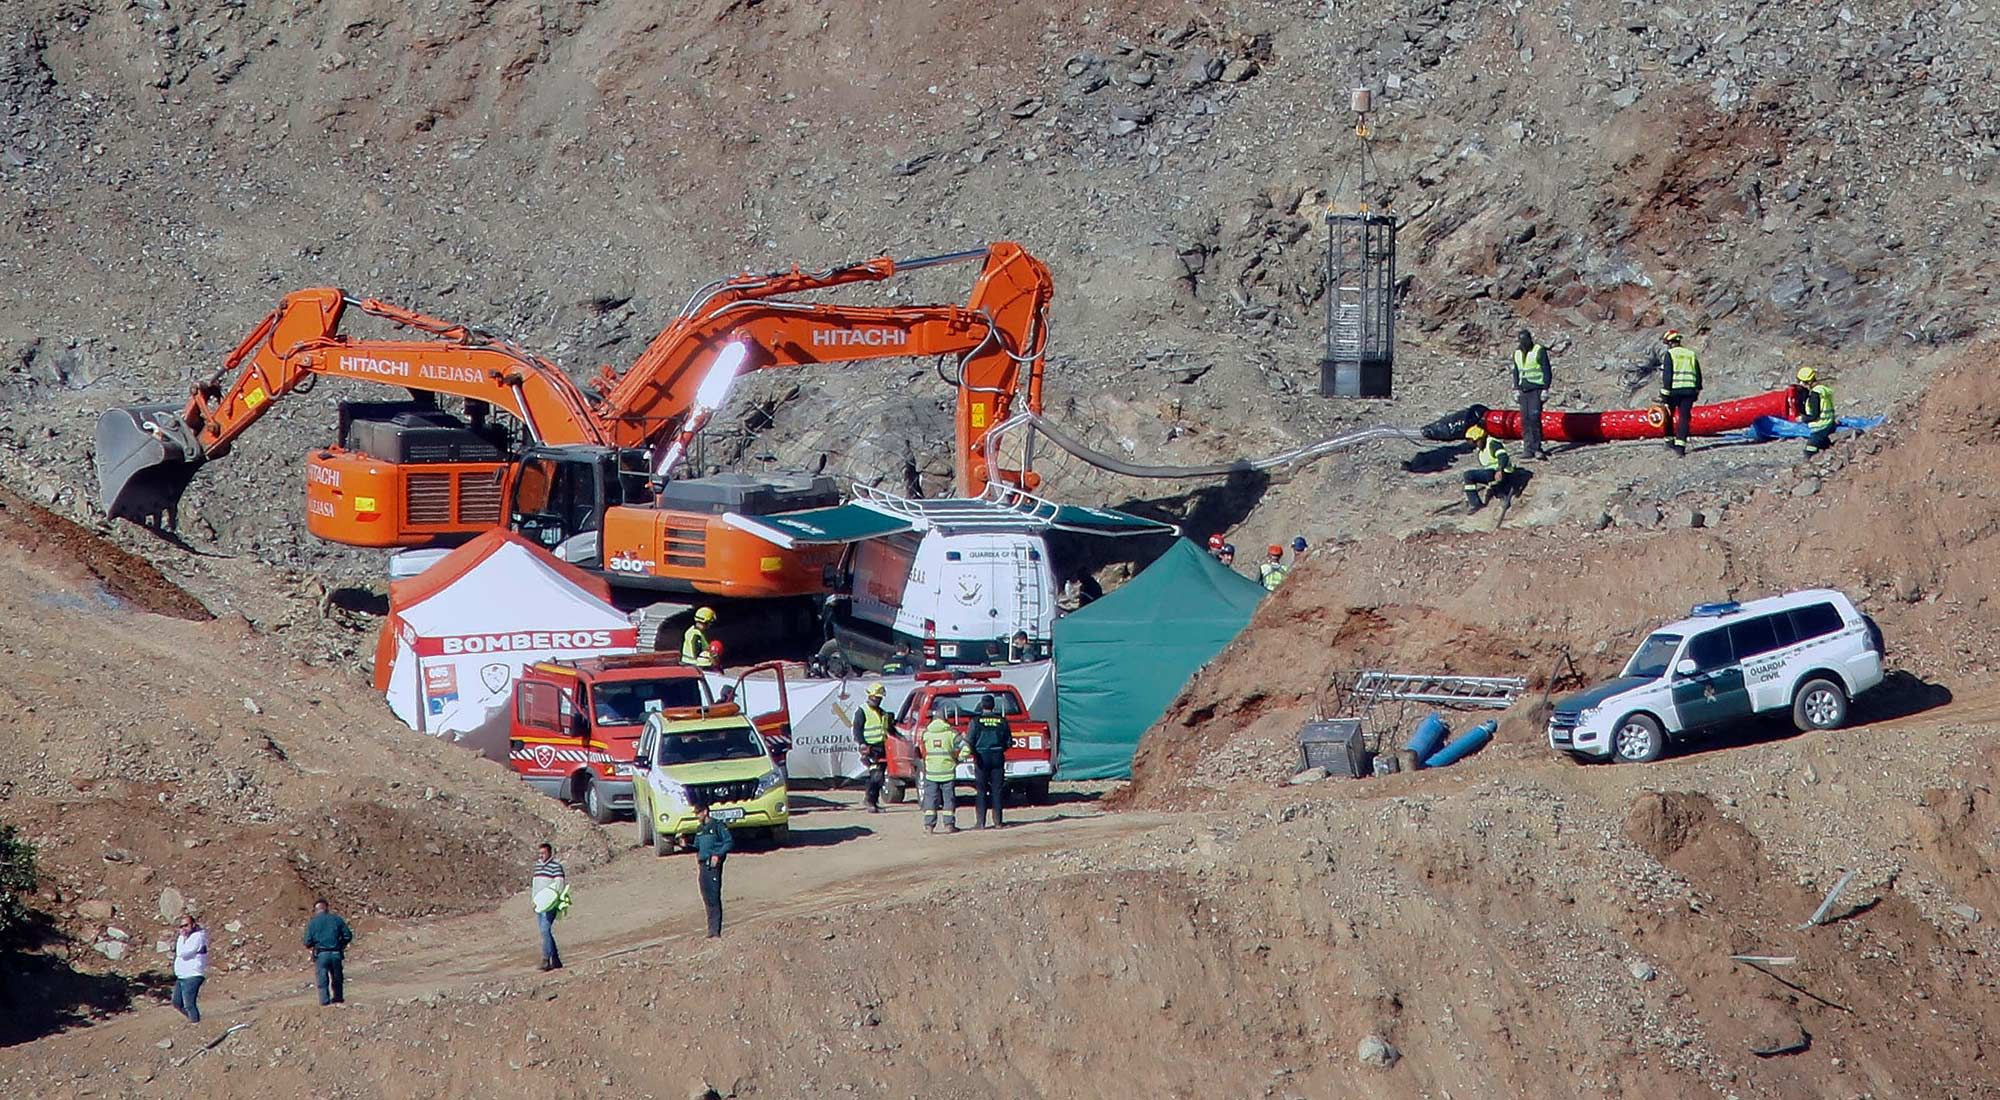 naaju.com:

<pre><pre>Spain: miners are within one meter of Julen's rescue

